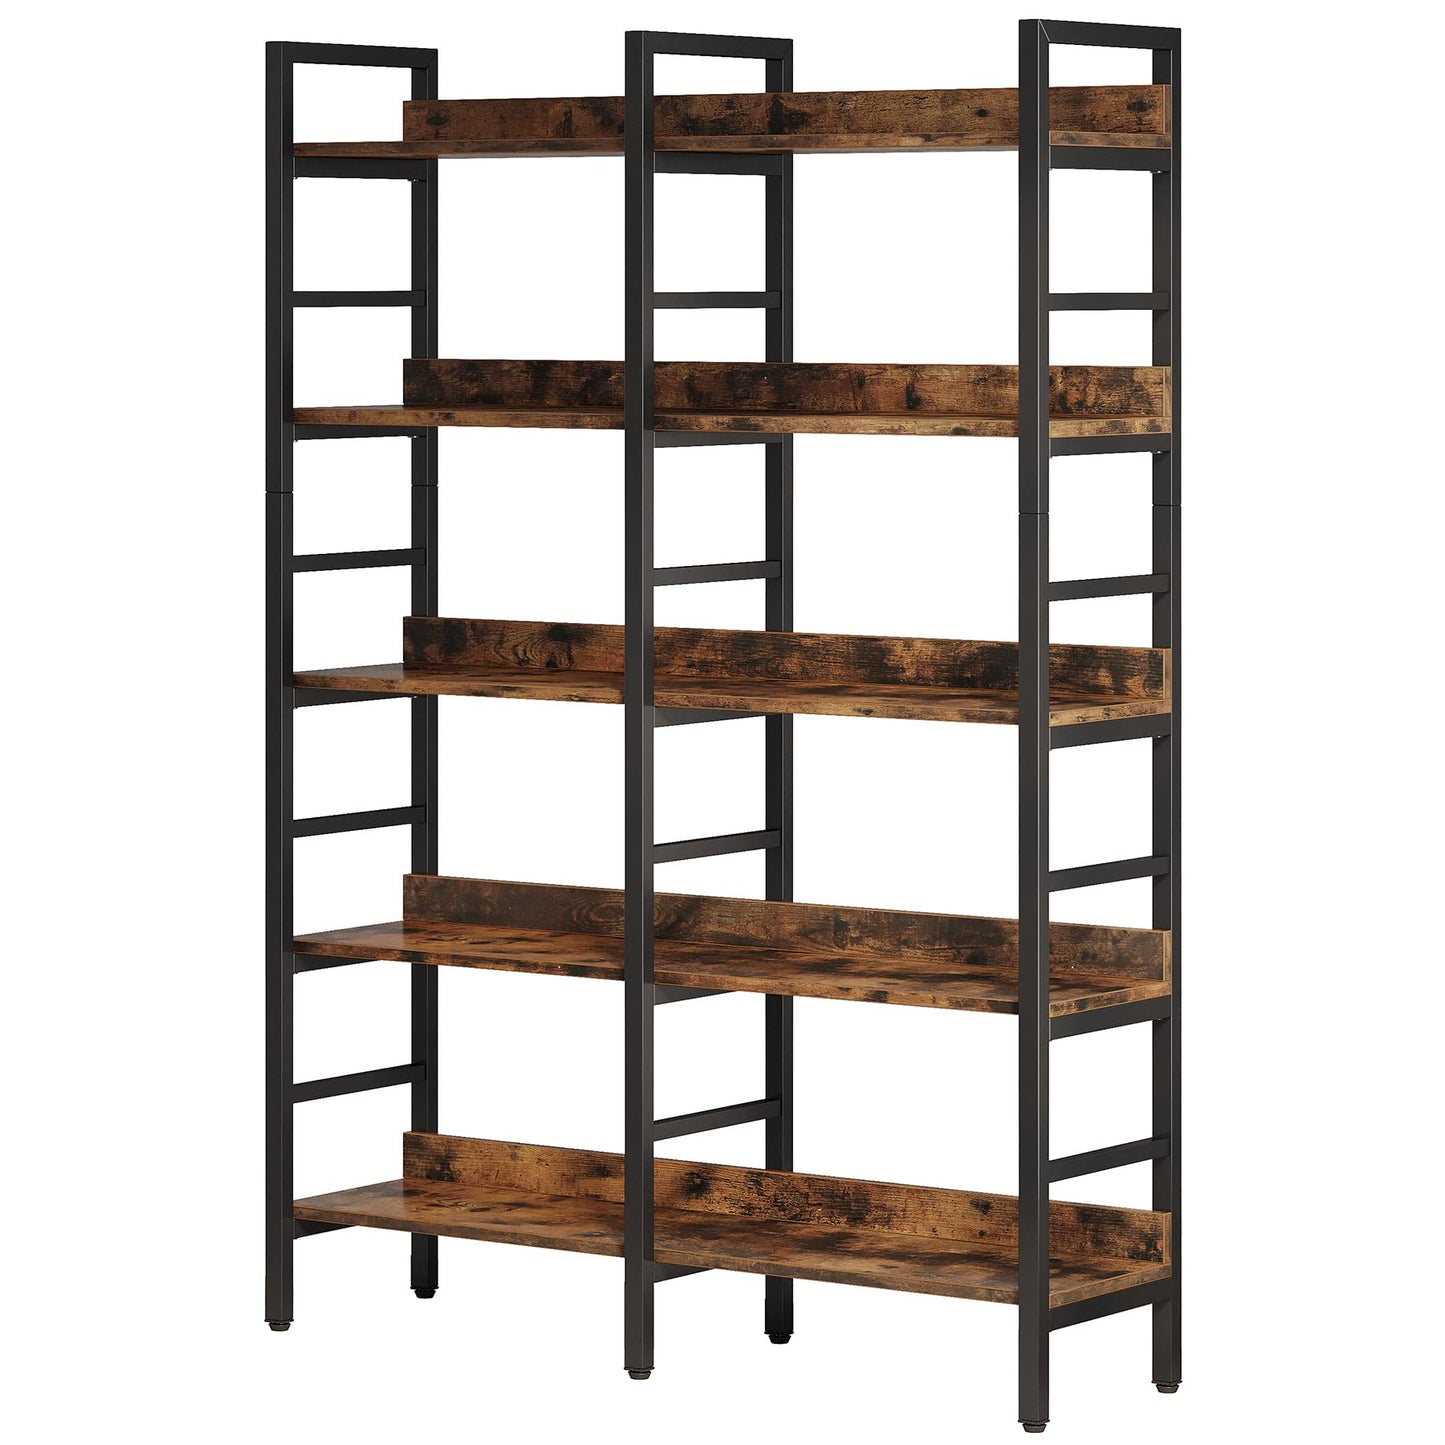 Tribesigns 5-Tier Industrial Bookshelf, 71”H x 47”W Etagere Bookcase, Freestanding Double Wide Book Shelf for Storage and Display, Wood and Metal Bookshelves for Living Room Home Office, Rustic Brown